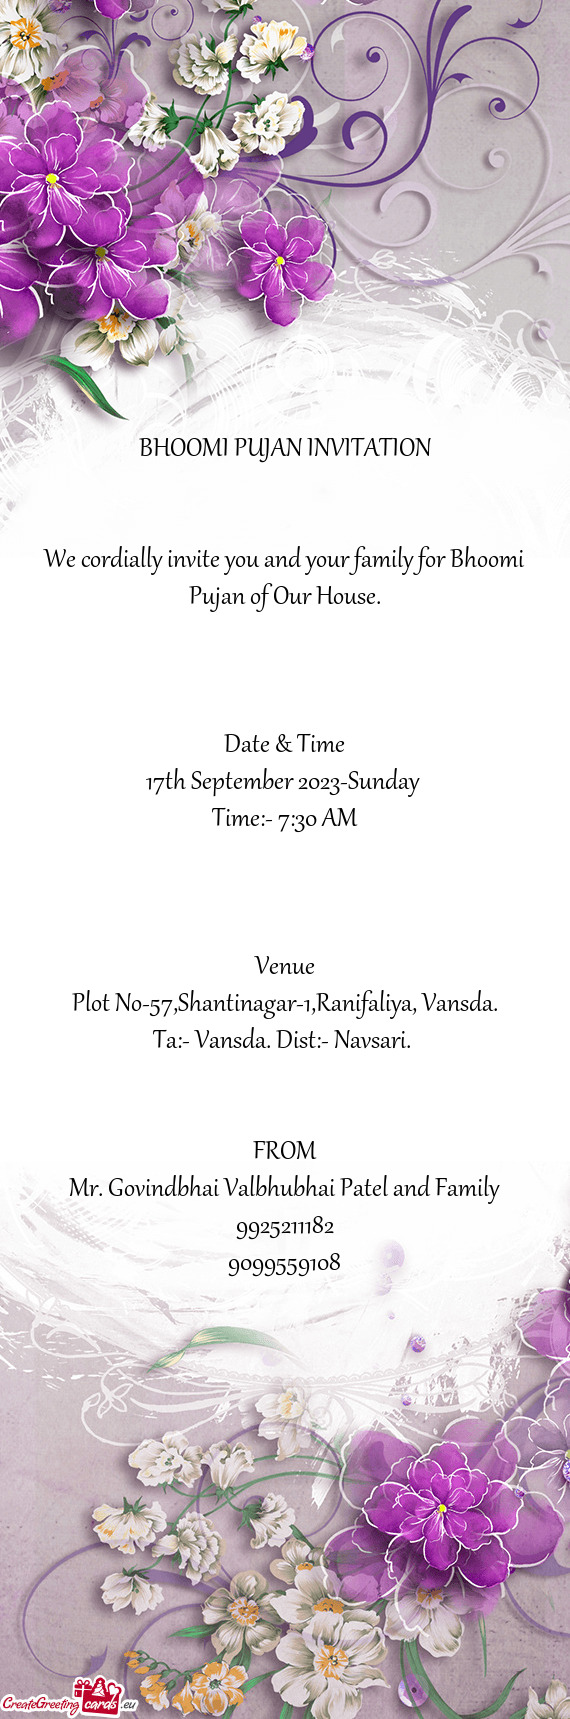 We cordially invite you and your family for Bhoomi Pujan of Our House